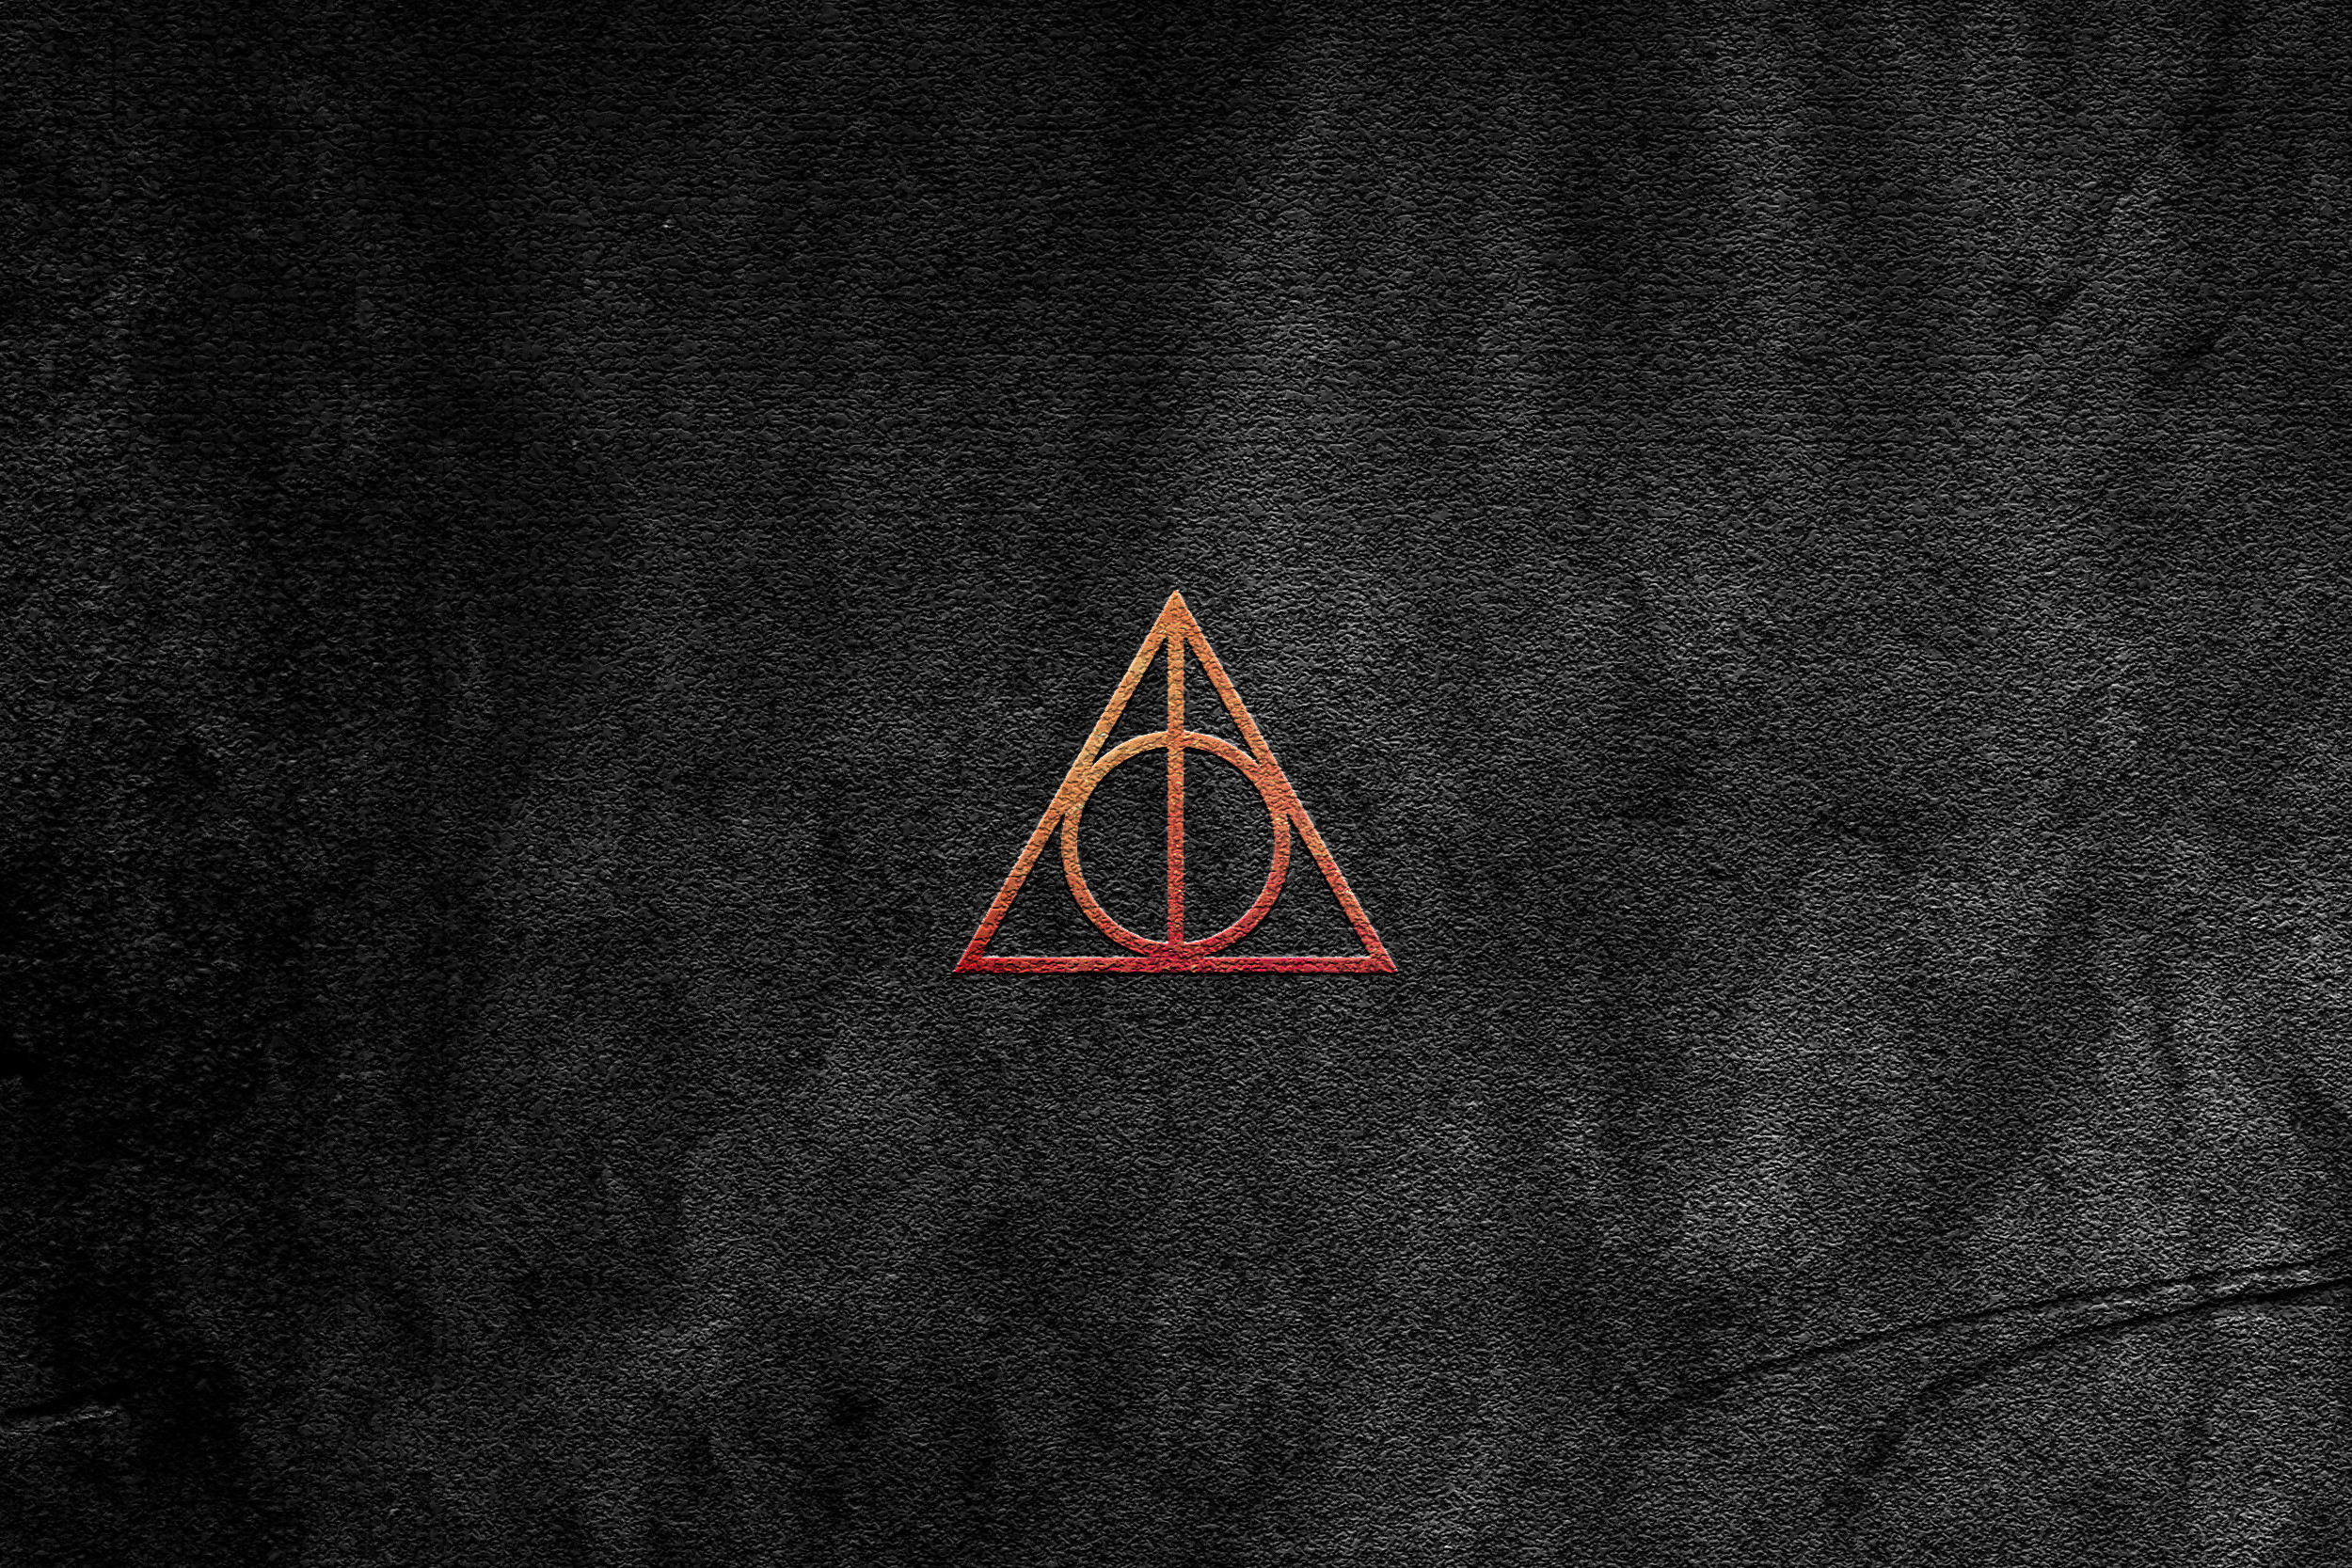 2500x1667 Deathly Hallows Wallpapers (70 Wallpapers)